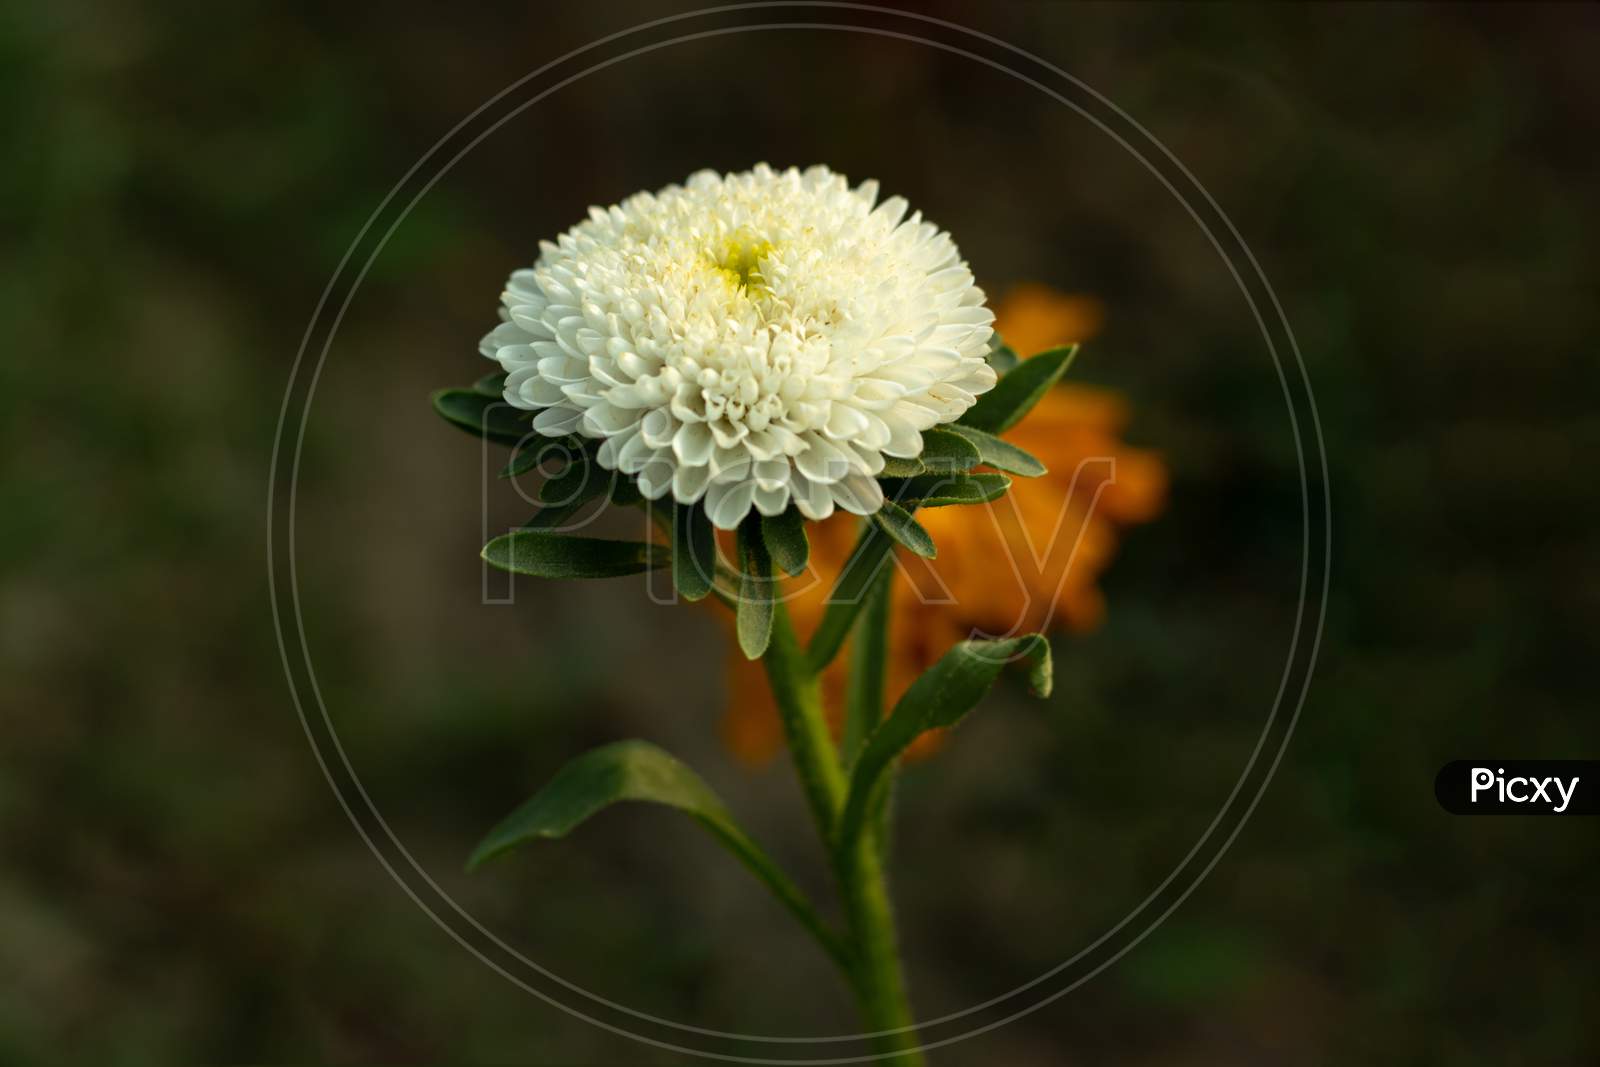 White Callistephus Chinensis, Or China Aster, Is A Cool White Flower